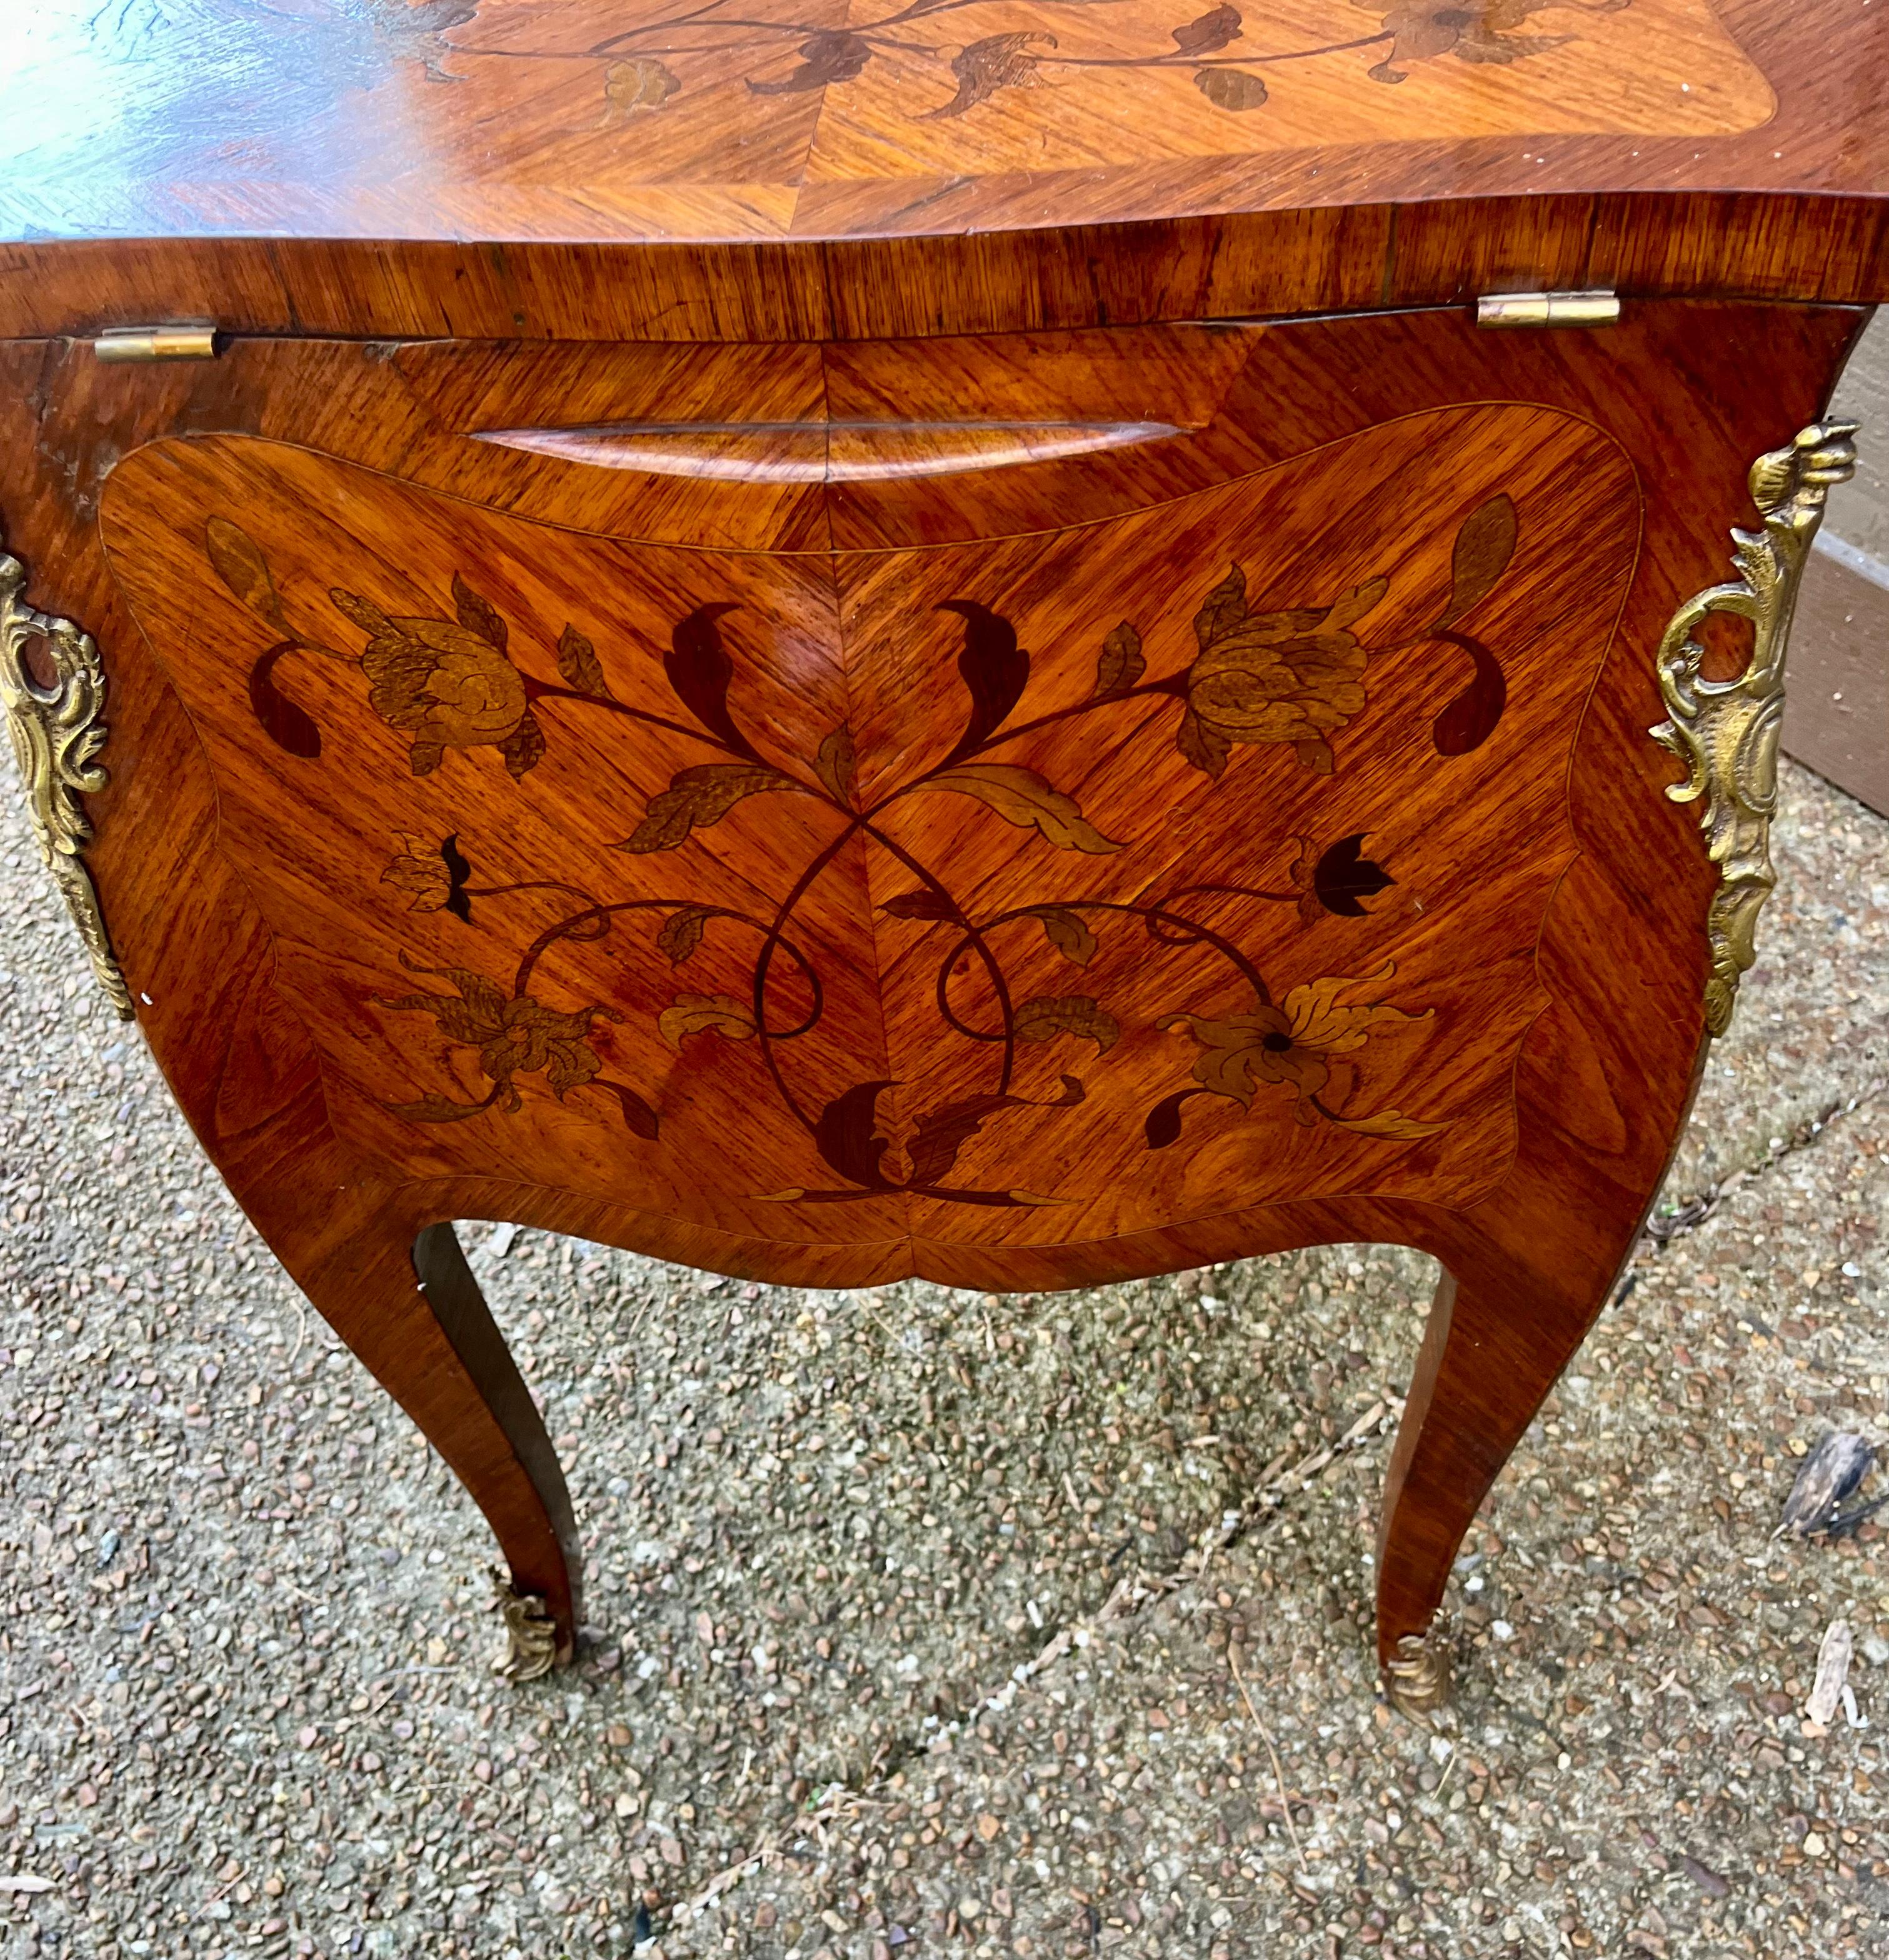 Louis XV Louis Xv Transitional to LouisXvi Tulipwood Parquetry and Marquetry Floral Case  For Sale